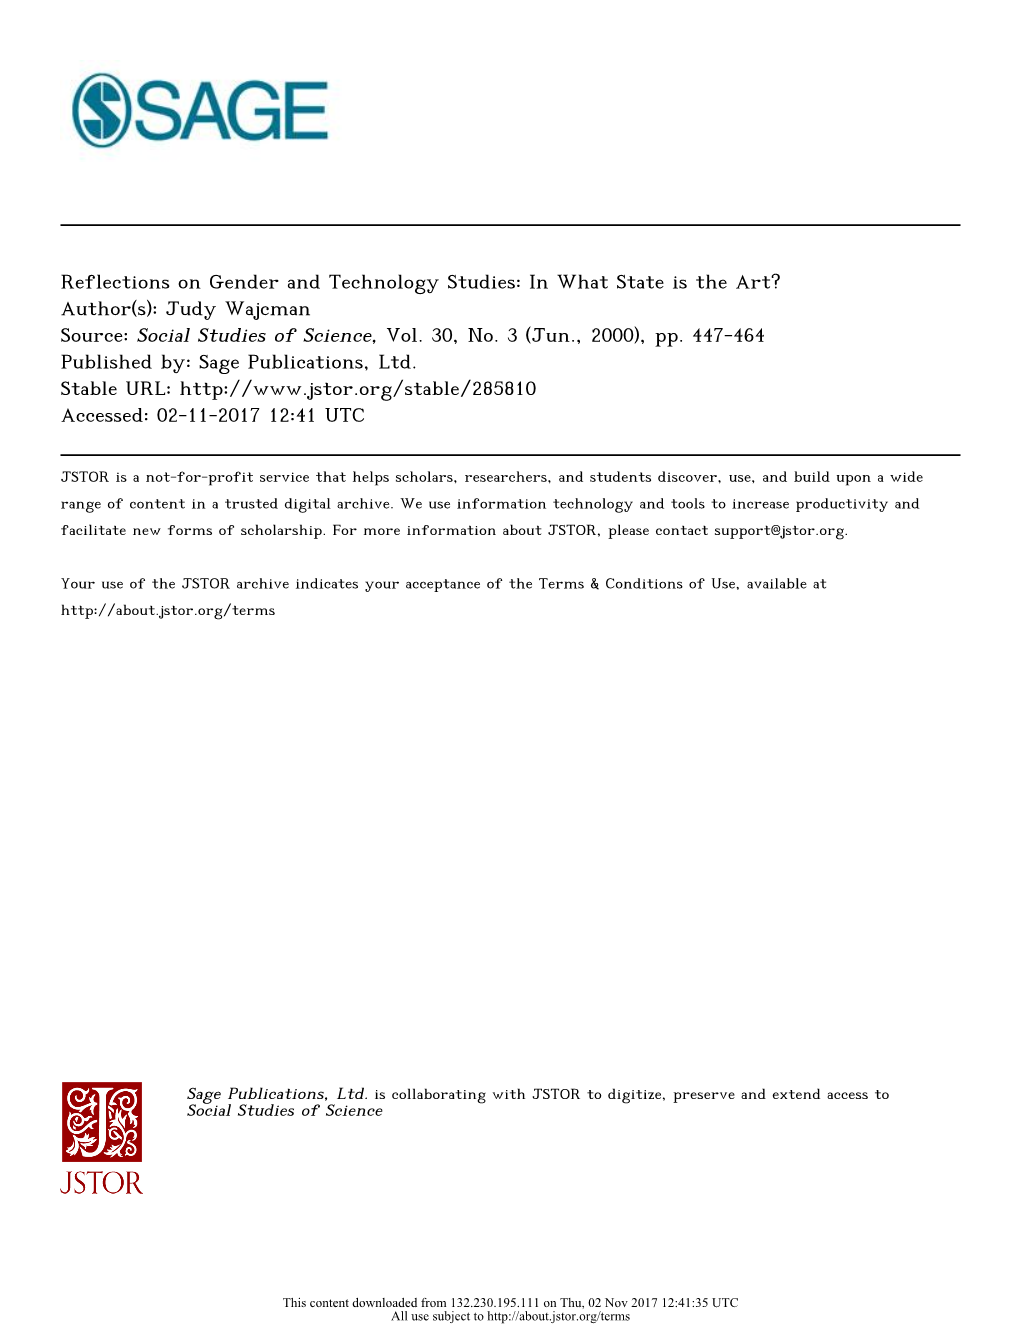 Reflections on Gender and Technology Studies: in What State Is the Art? Author(S): Judy Wajcman Source: Social Studies of Science, Vol